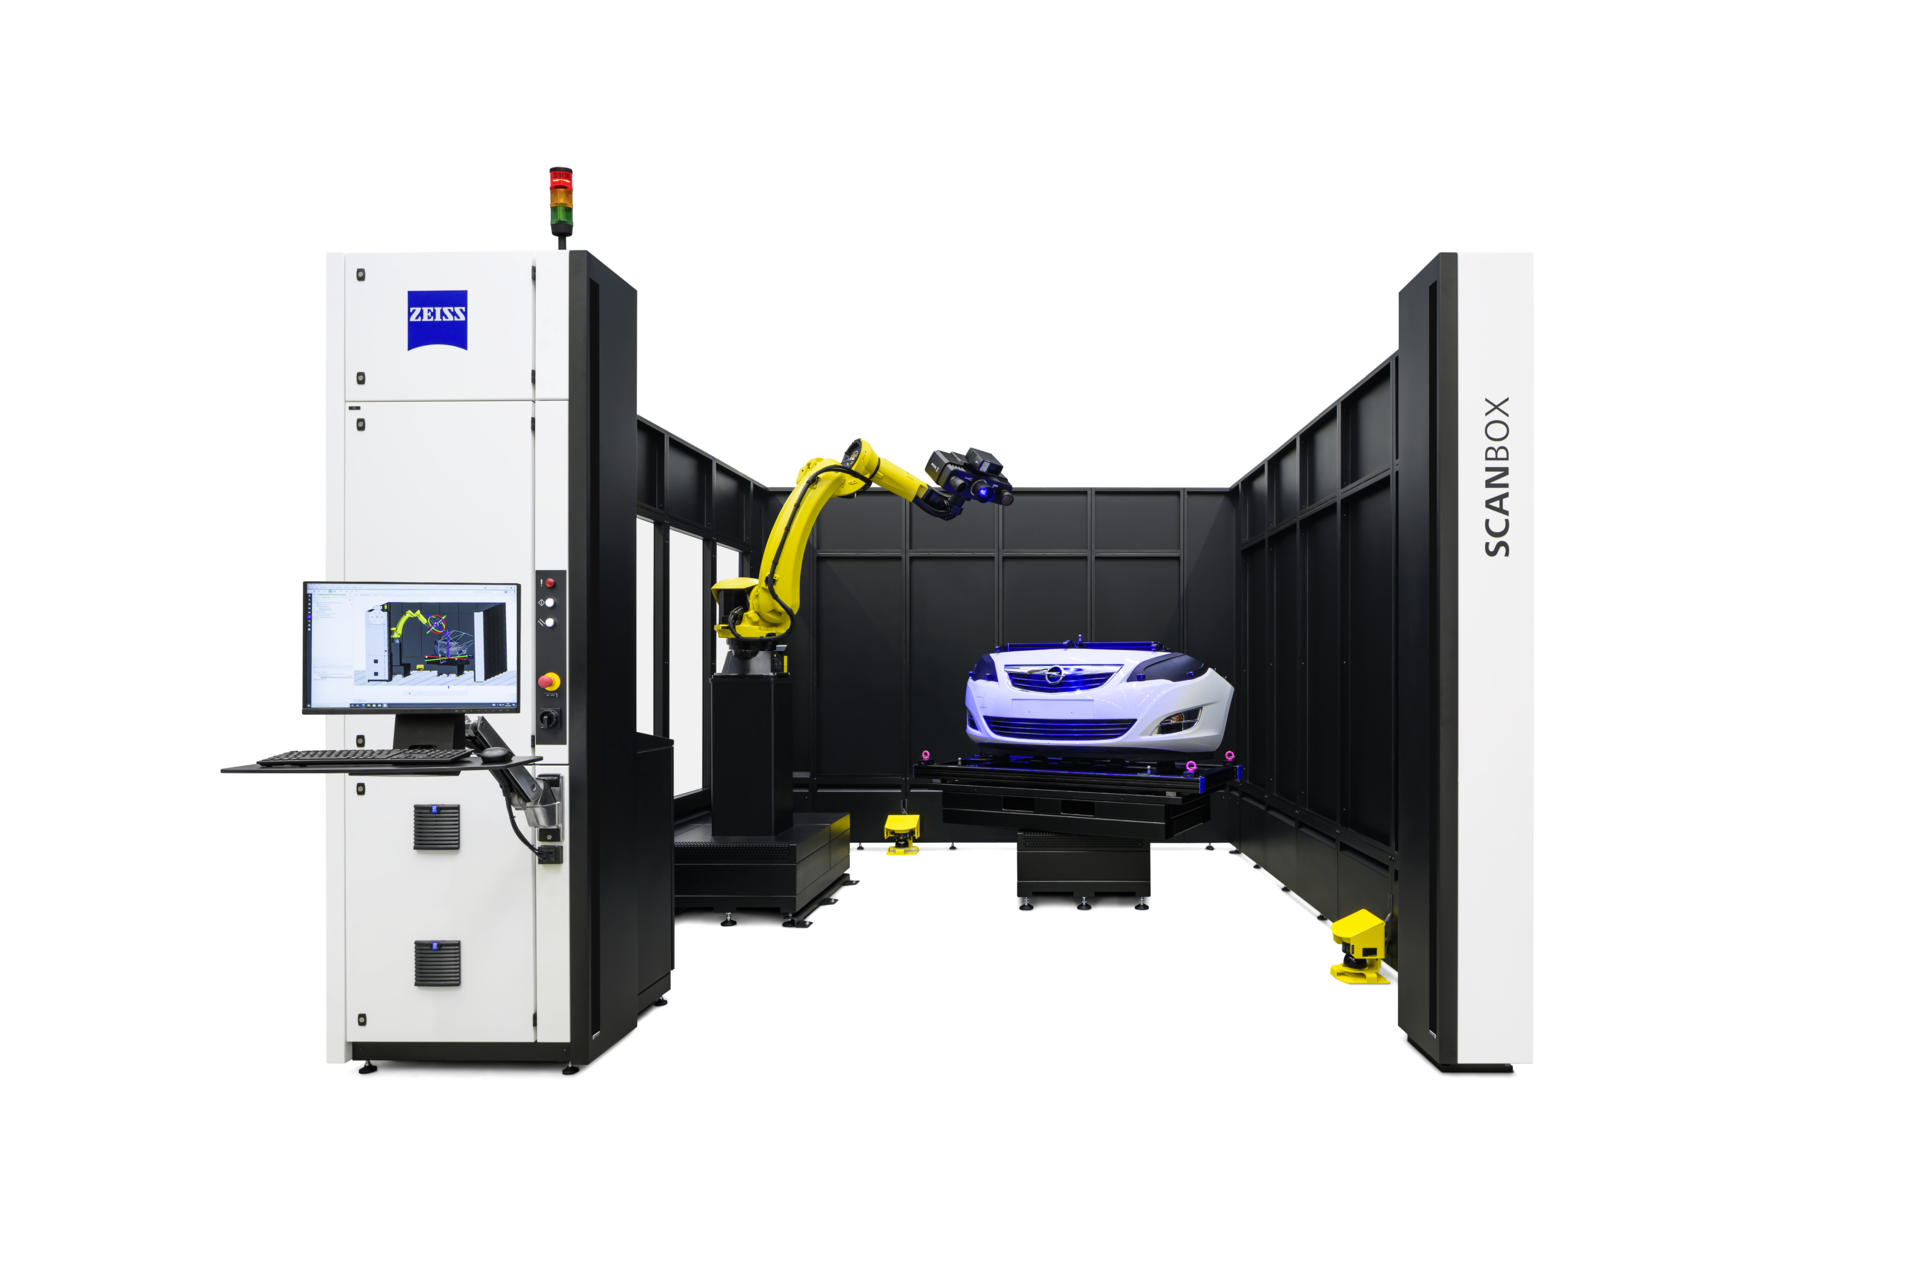 zeiss scanbox 5120 automated 3d scanning